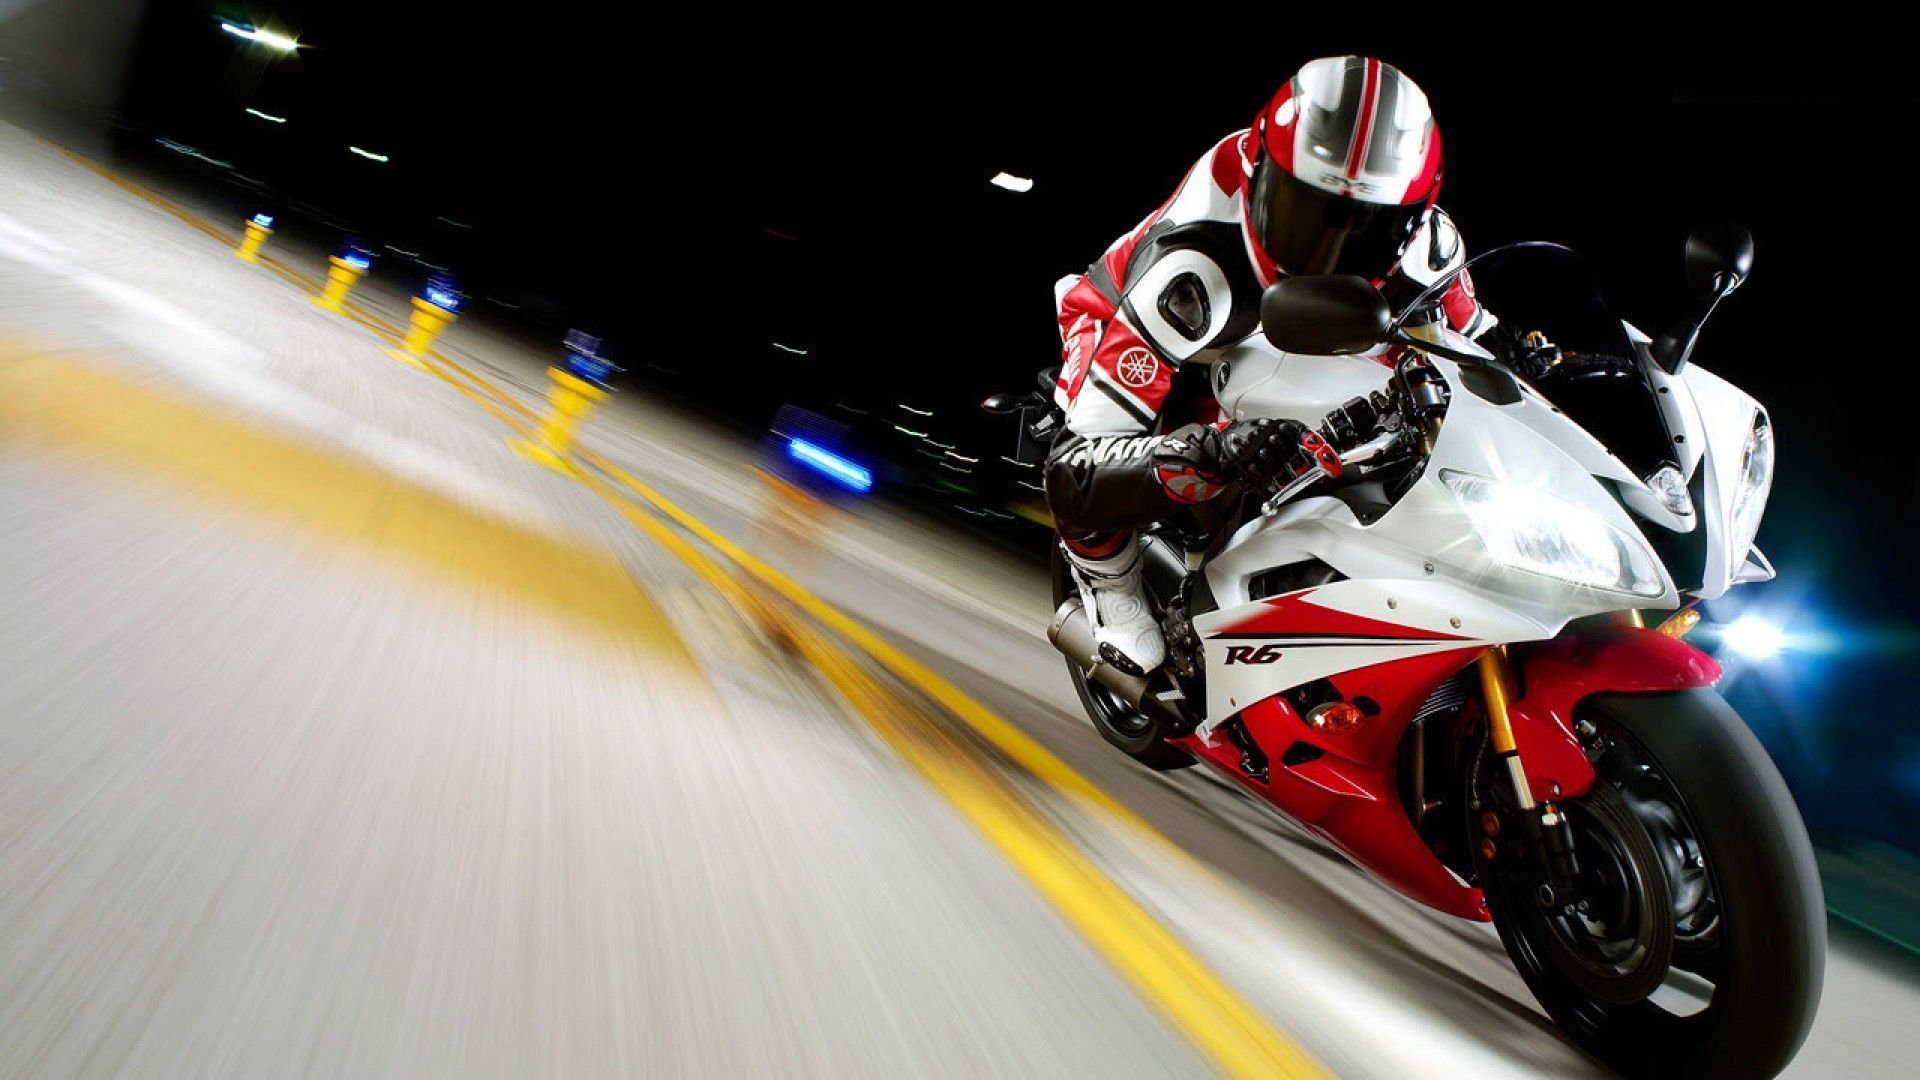 5 Awesome Motorcycle Wallpapers - Bikerpunks.com